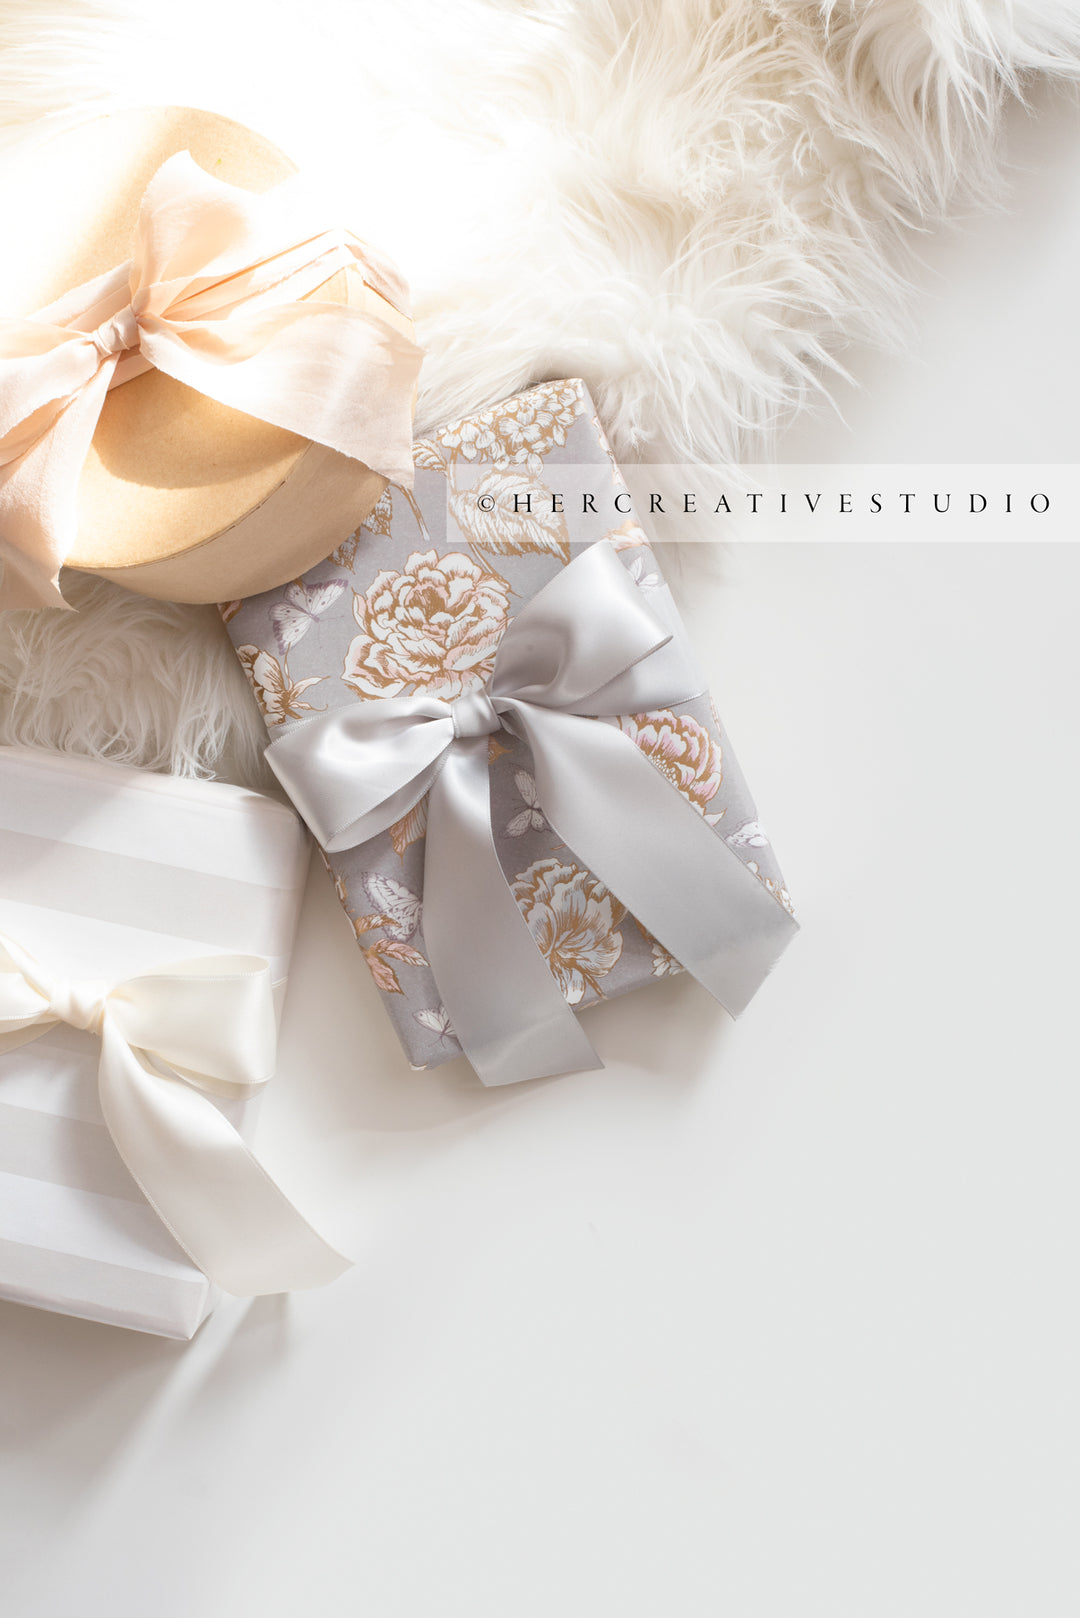 Gifts with Ribbon in Sunlight, Stock Image